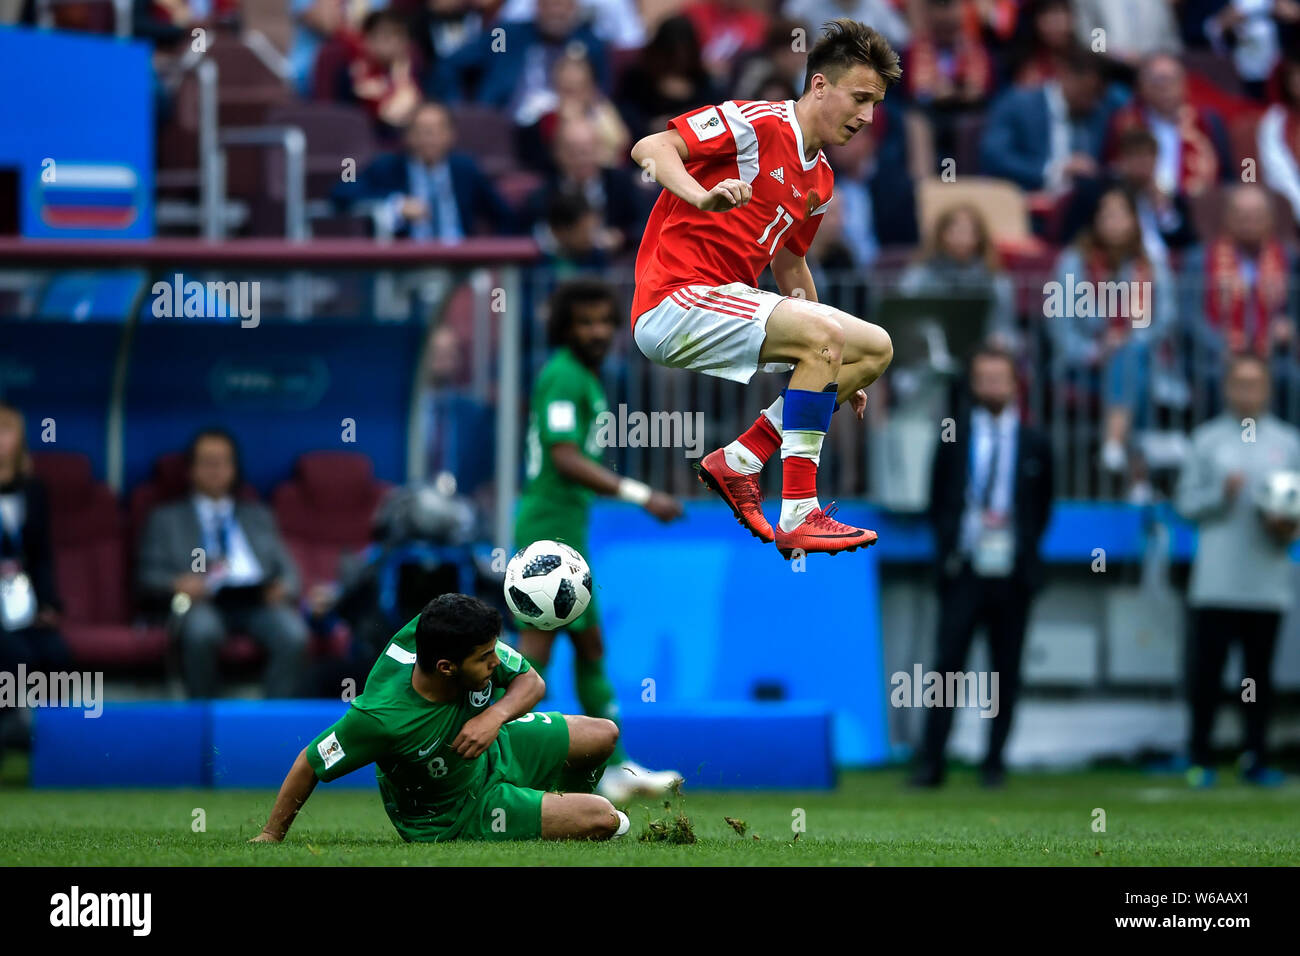 Aleksandr Golovin of Russia, right, challenges Yahya Al-Shehri of Saudi Arabia in their Group A match during the 2018 FIFA World Cup in Moscow, Russia Stock Photo